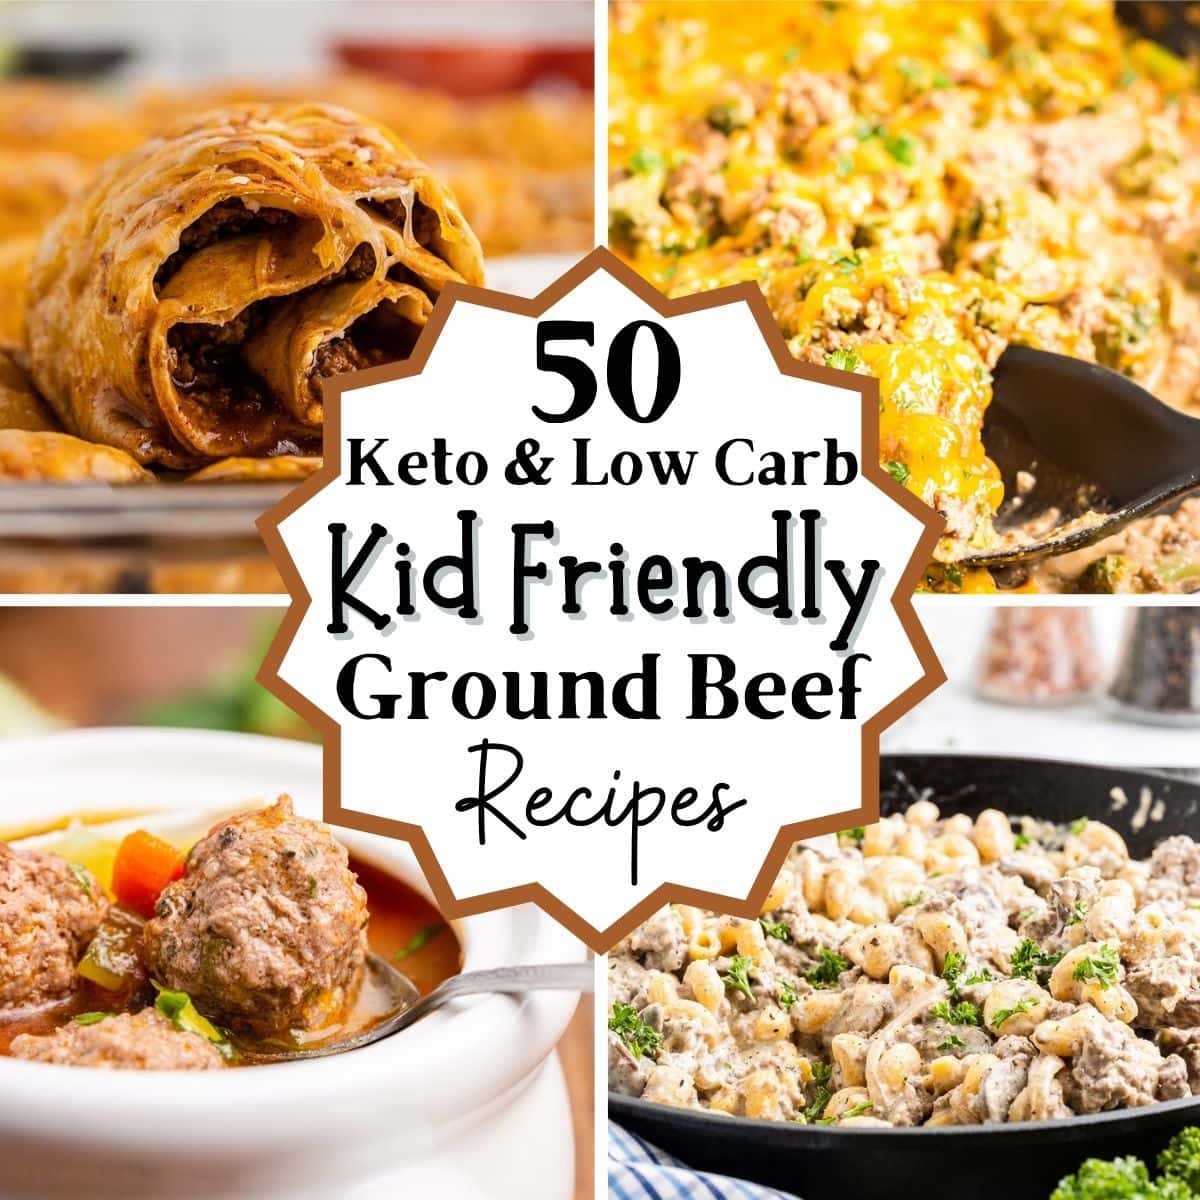 Photo collage with 4 picture of keto kid friendly ground beef recipes in it.